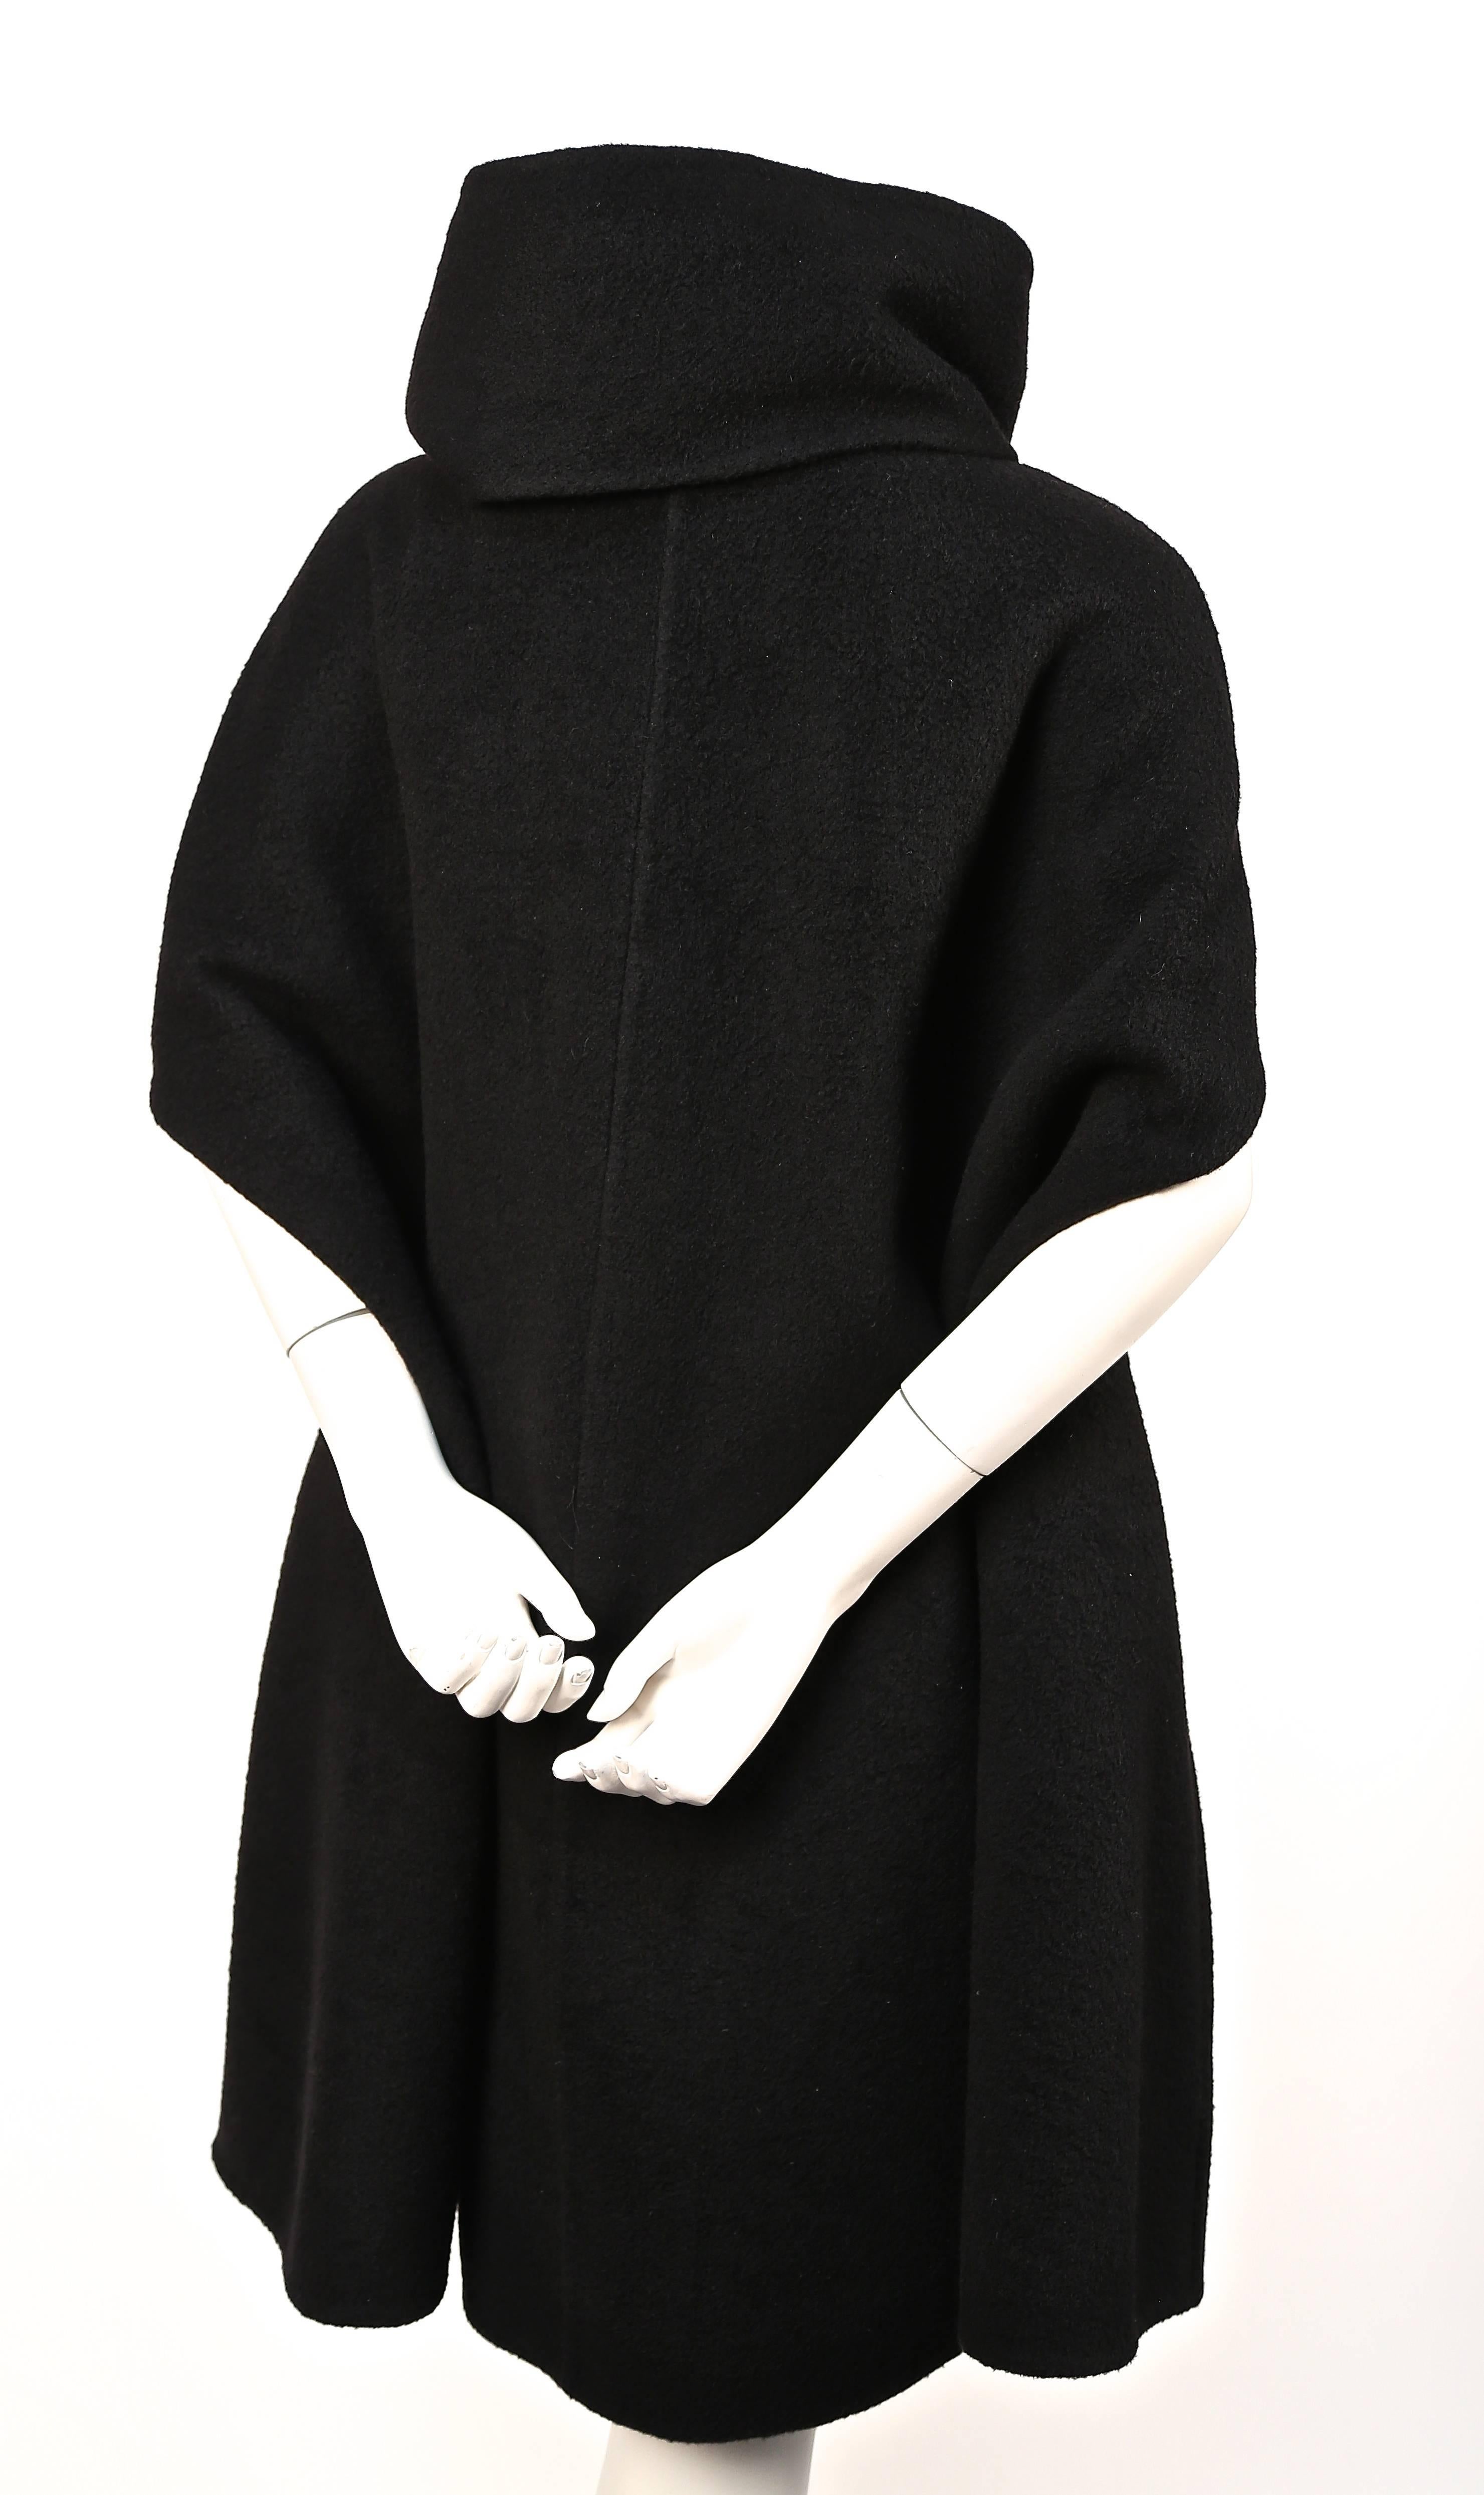 Jet black super soft cashmere cape coat with flared shape and draped neckline from Rick Owens. Italian size 44 which best fits a US 8 or 10. Made in Italy. 100% cashmere. Snap closure. Unlined.  Very good condition. 